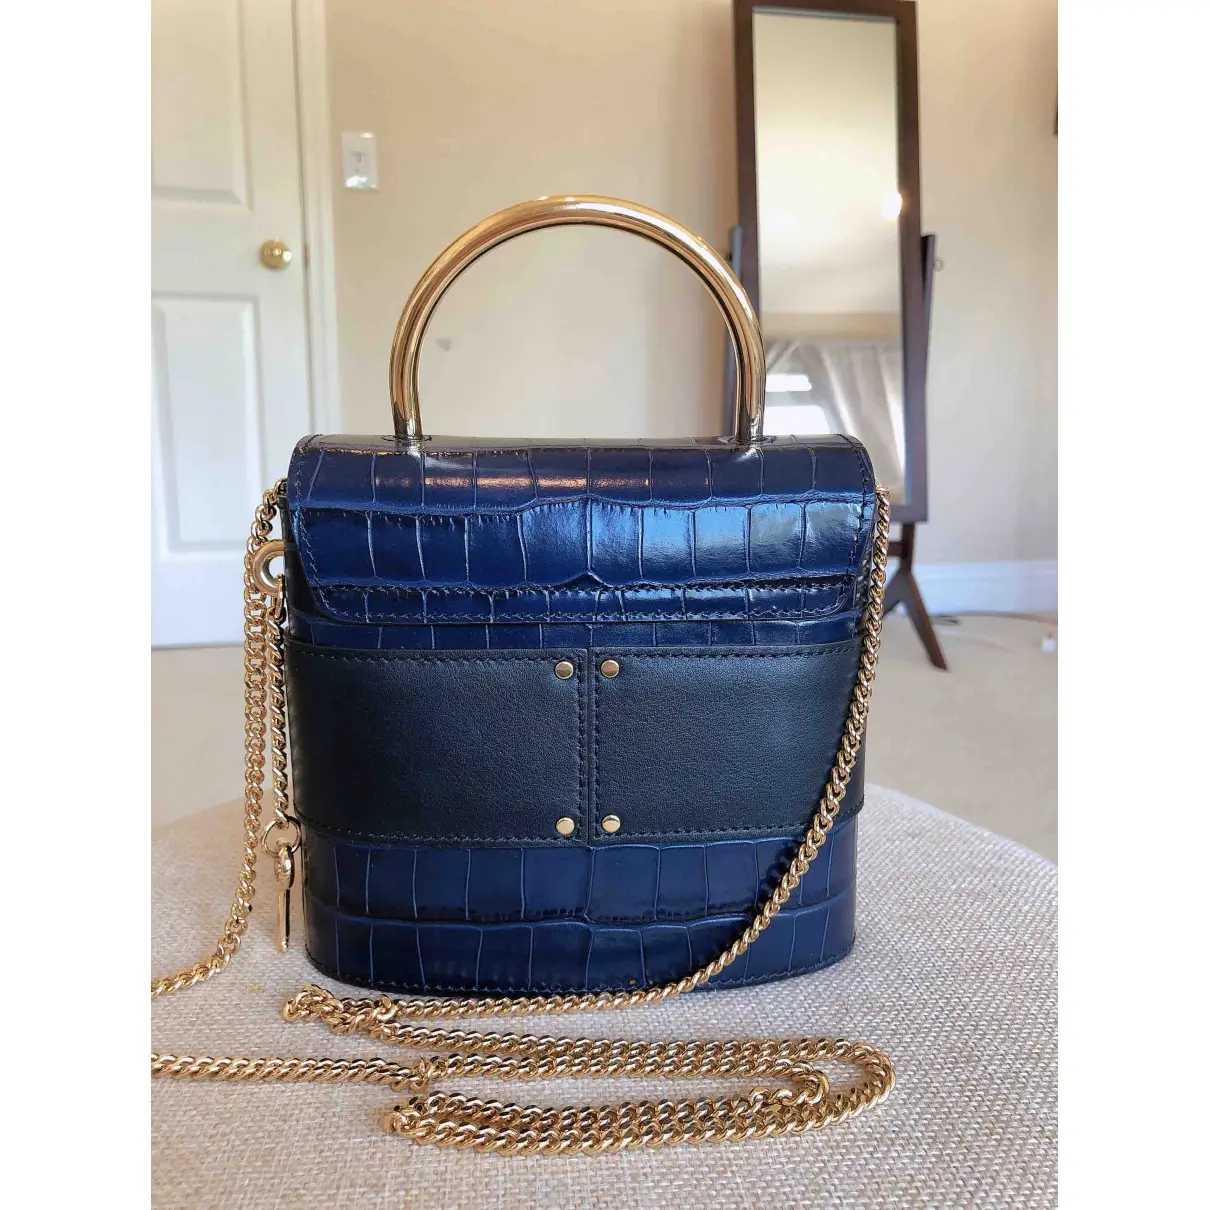 Buy Chloé Aby leather bag online